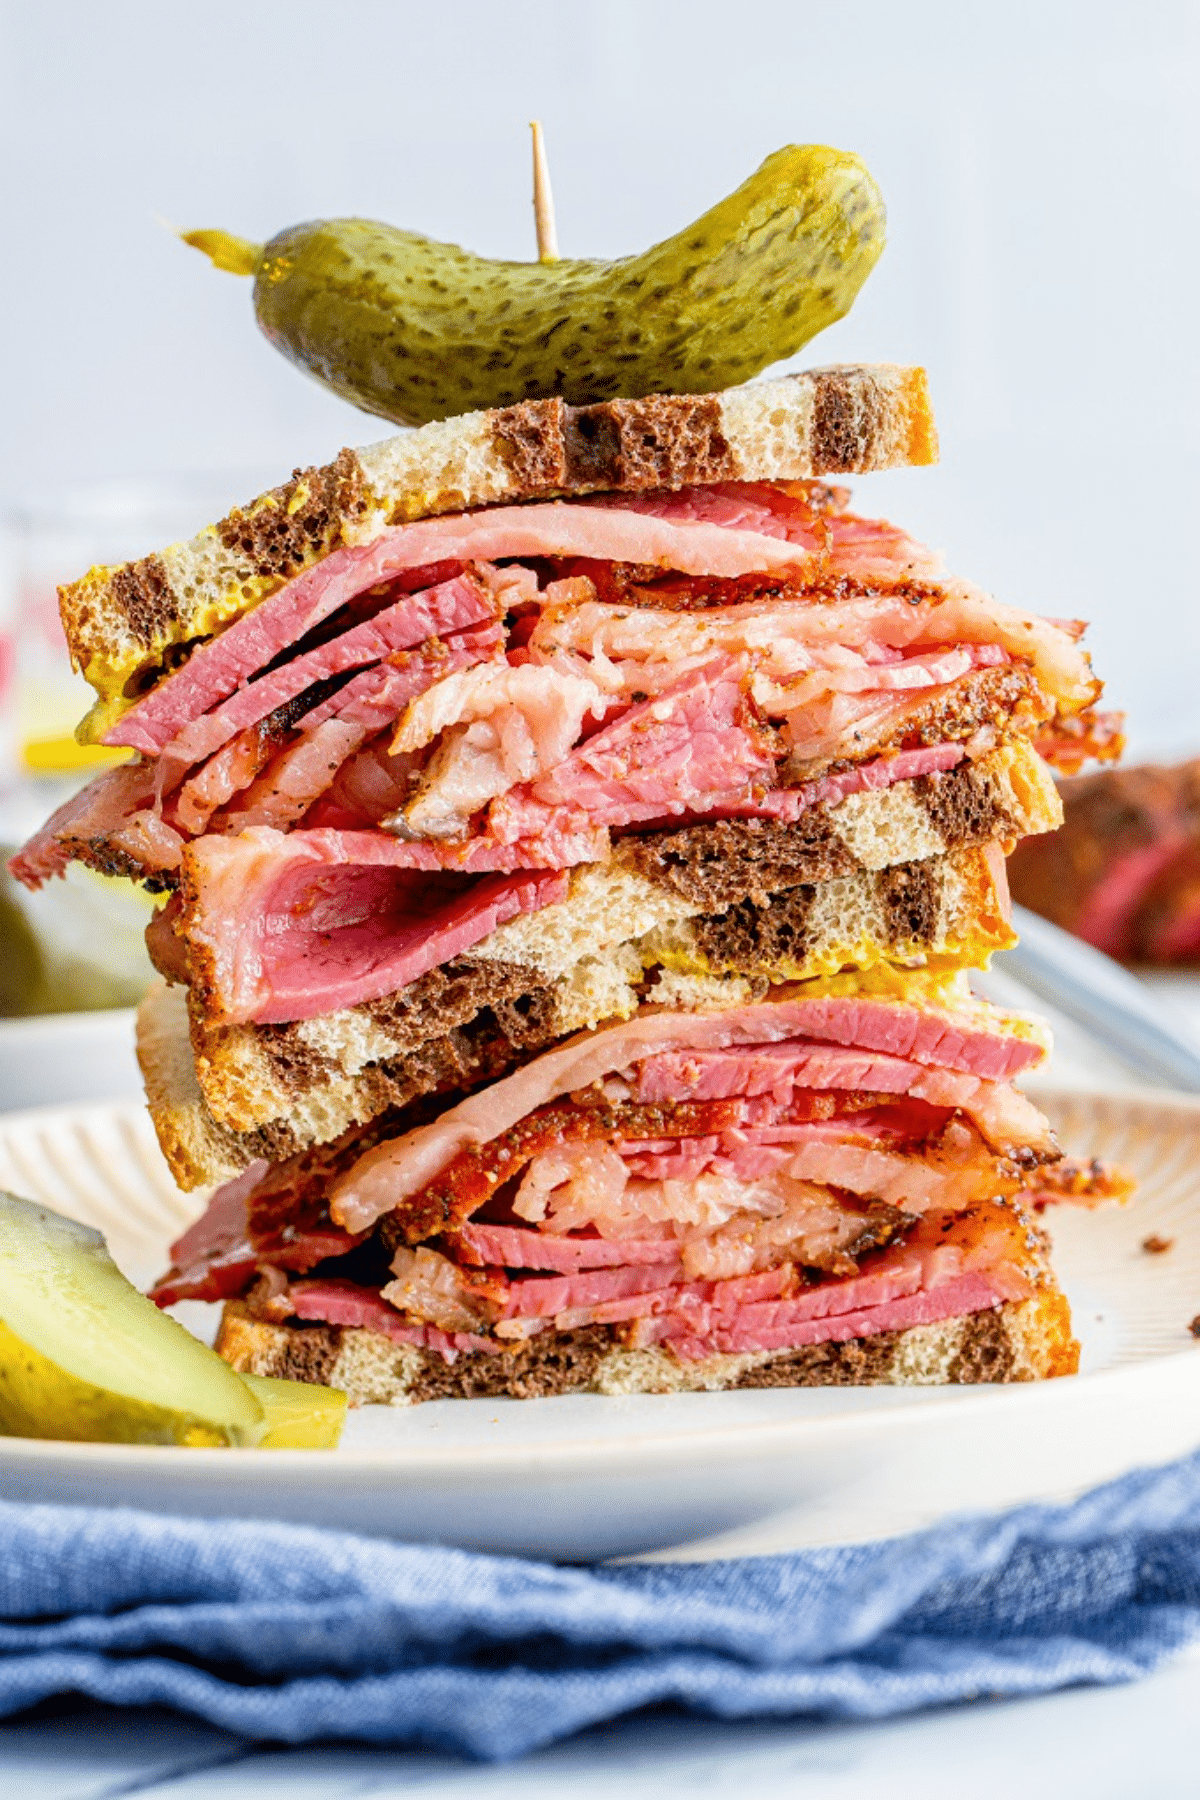 Loaded smoked pastrami sandwich on multi-colored rye bread. 